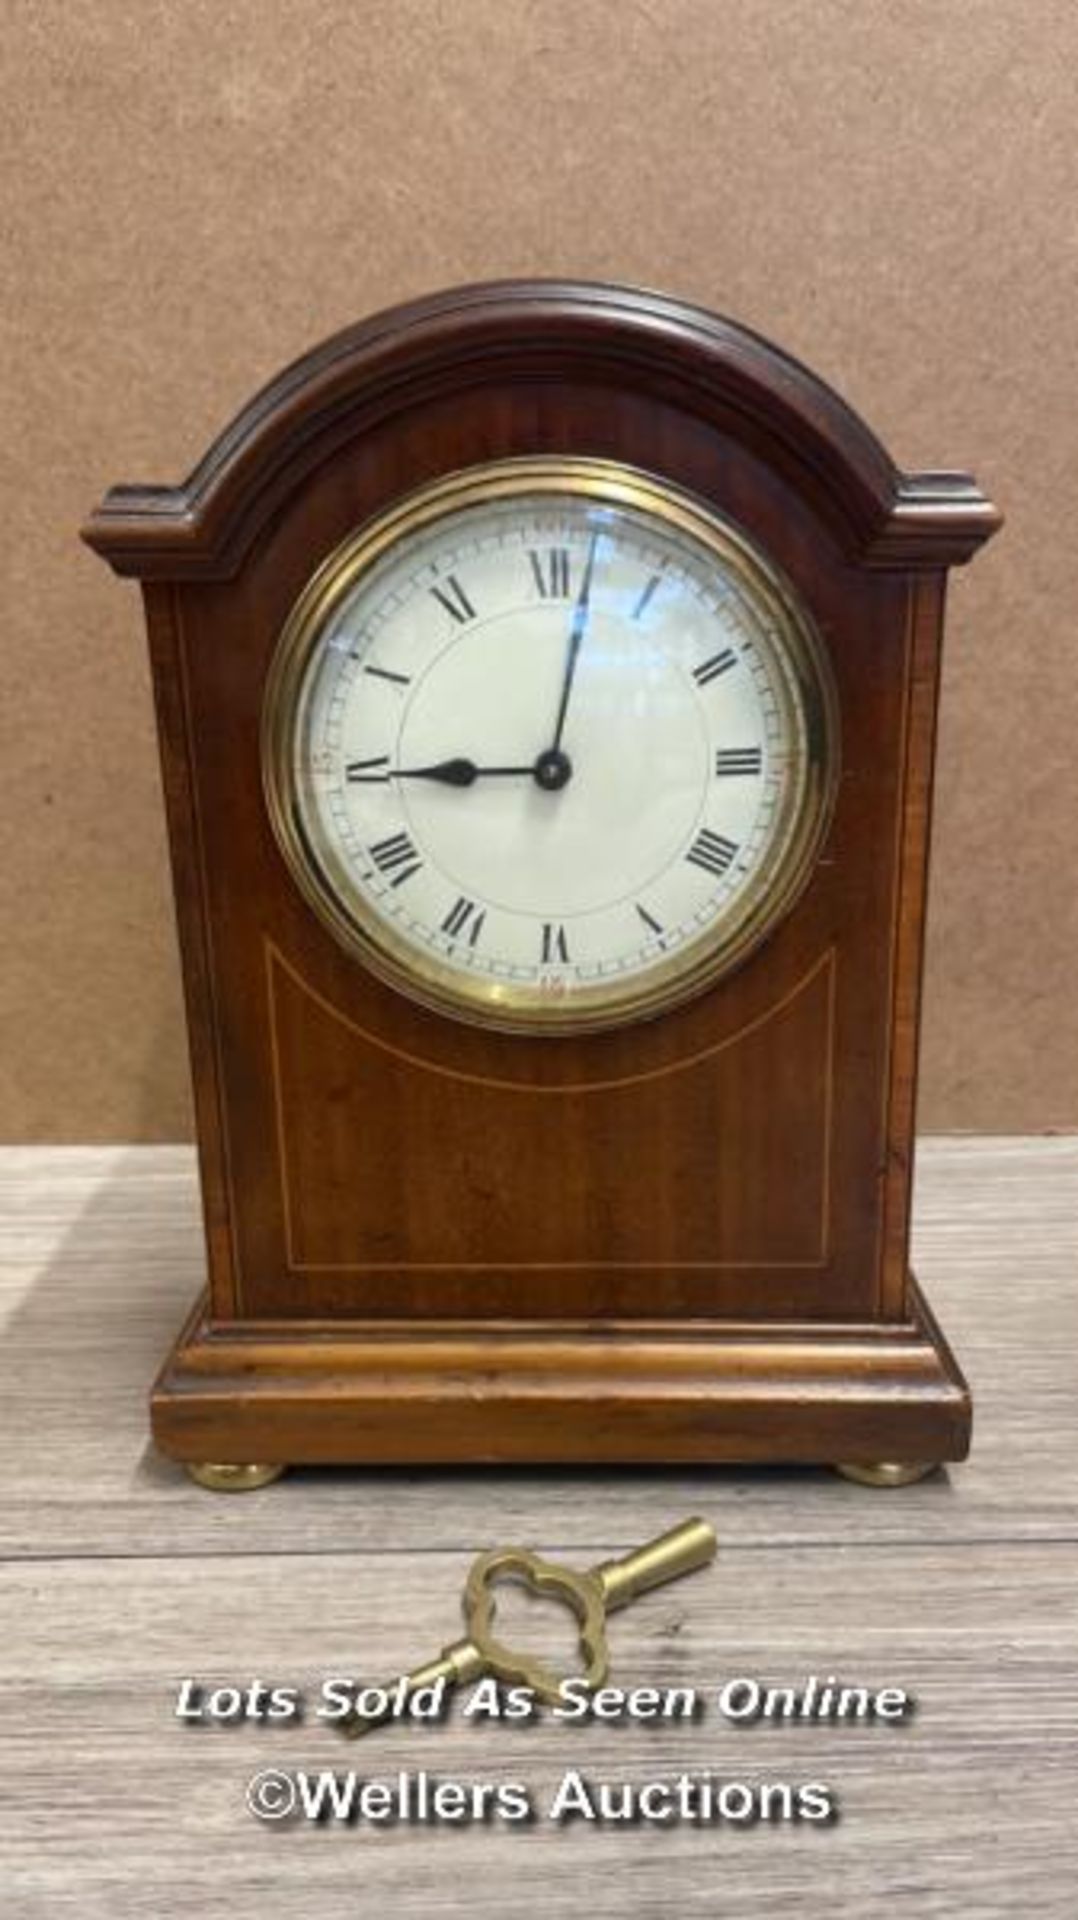 VINTAGE MANTLE CLOCK WITH KEY, MADE IN FRANCE AND IN WORKING ORDER, 15.5 X 22 X 8CM